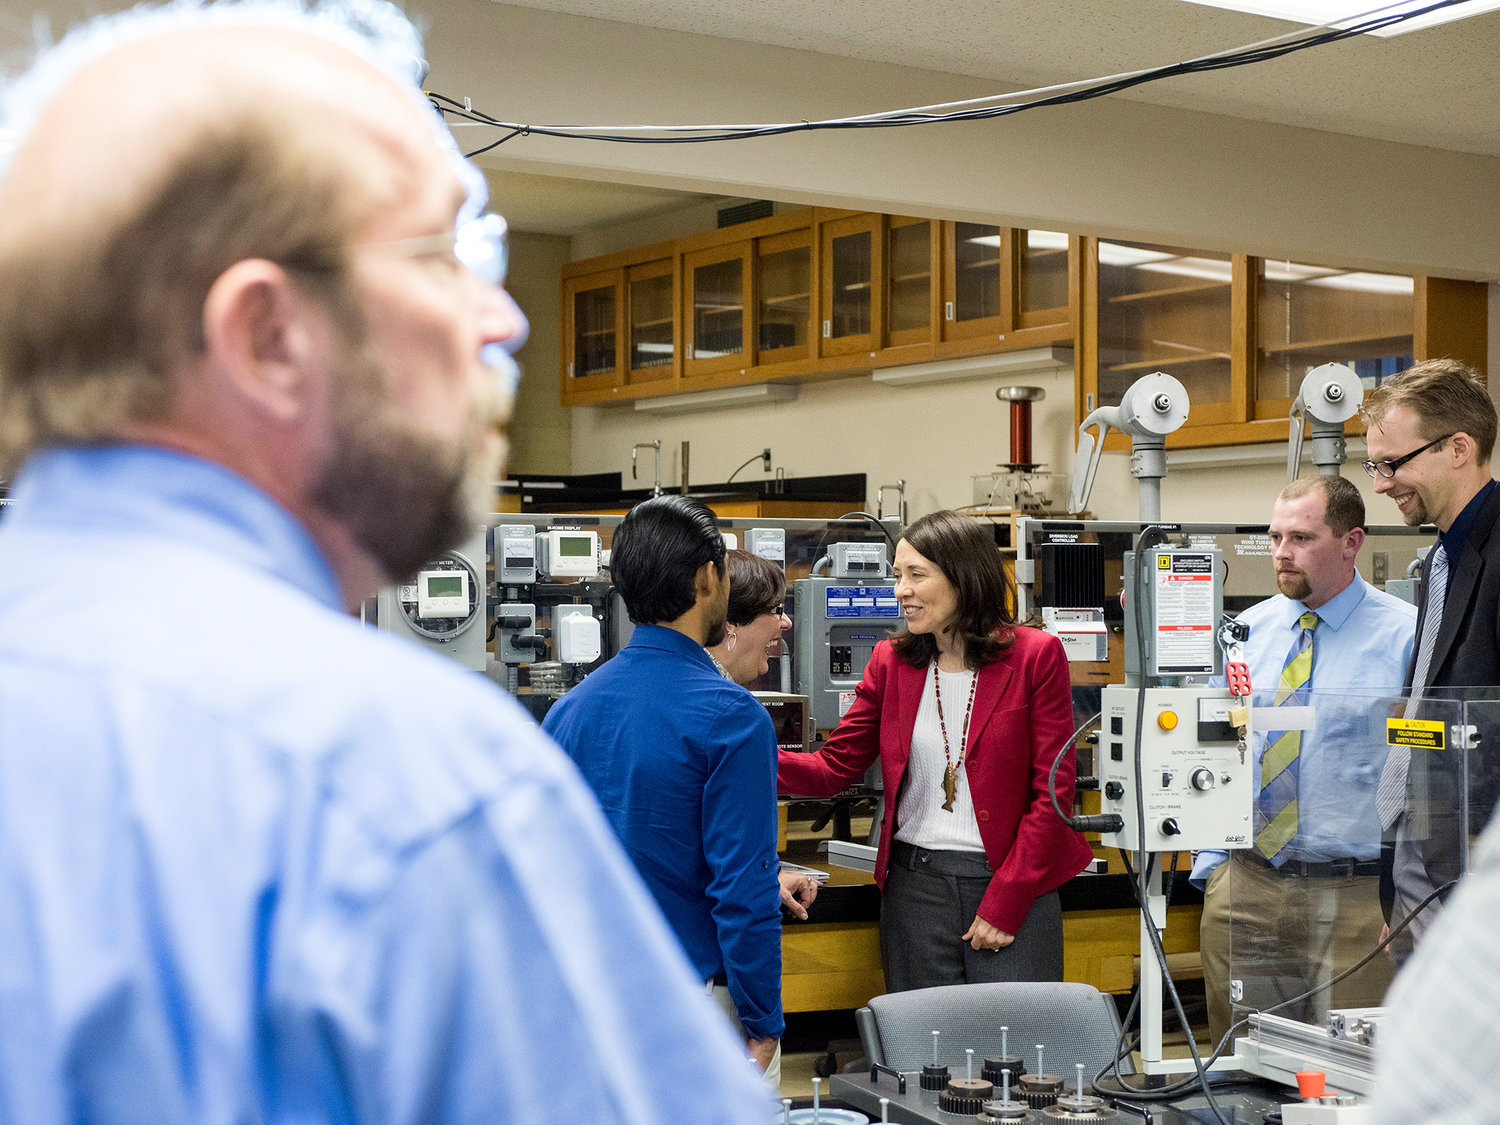 Barbara Hins-Turner, director of the Pacific Northwest Center of Excellence for Clean Energy, center, laughs with U.S. Sen. Maria Cantwell, D-Washington, as she tours an electrical engineering classroom in Kemp Hall at Centralia College on Wednesday afternoon.